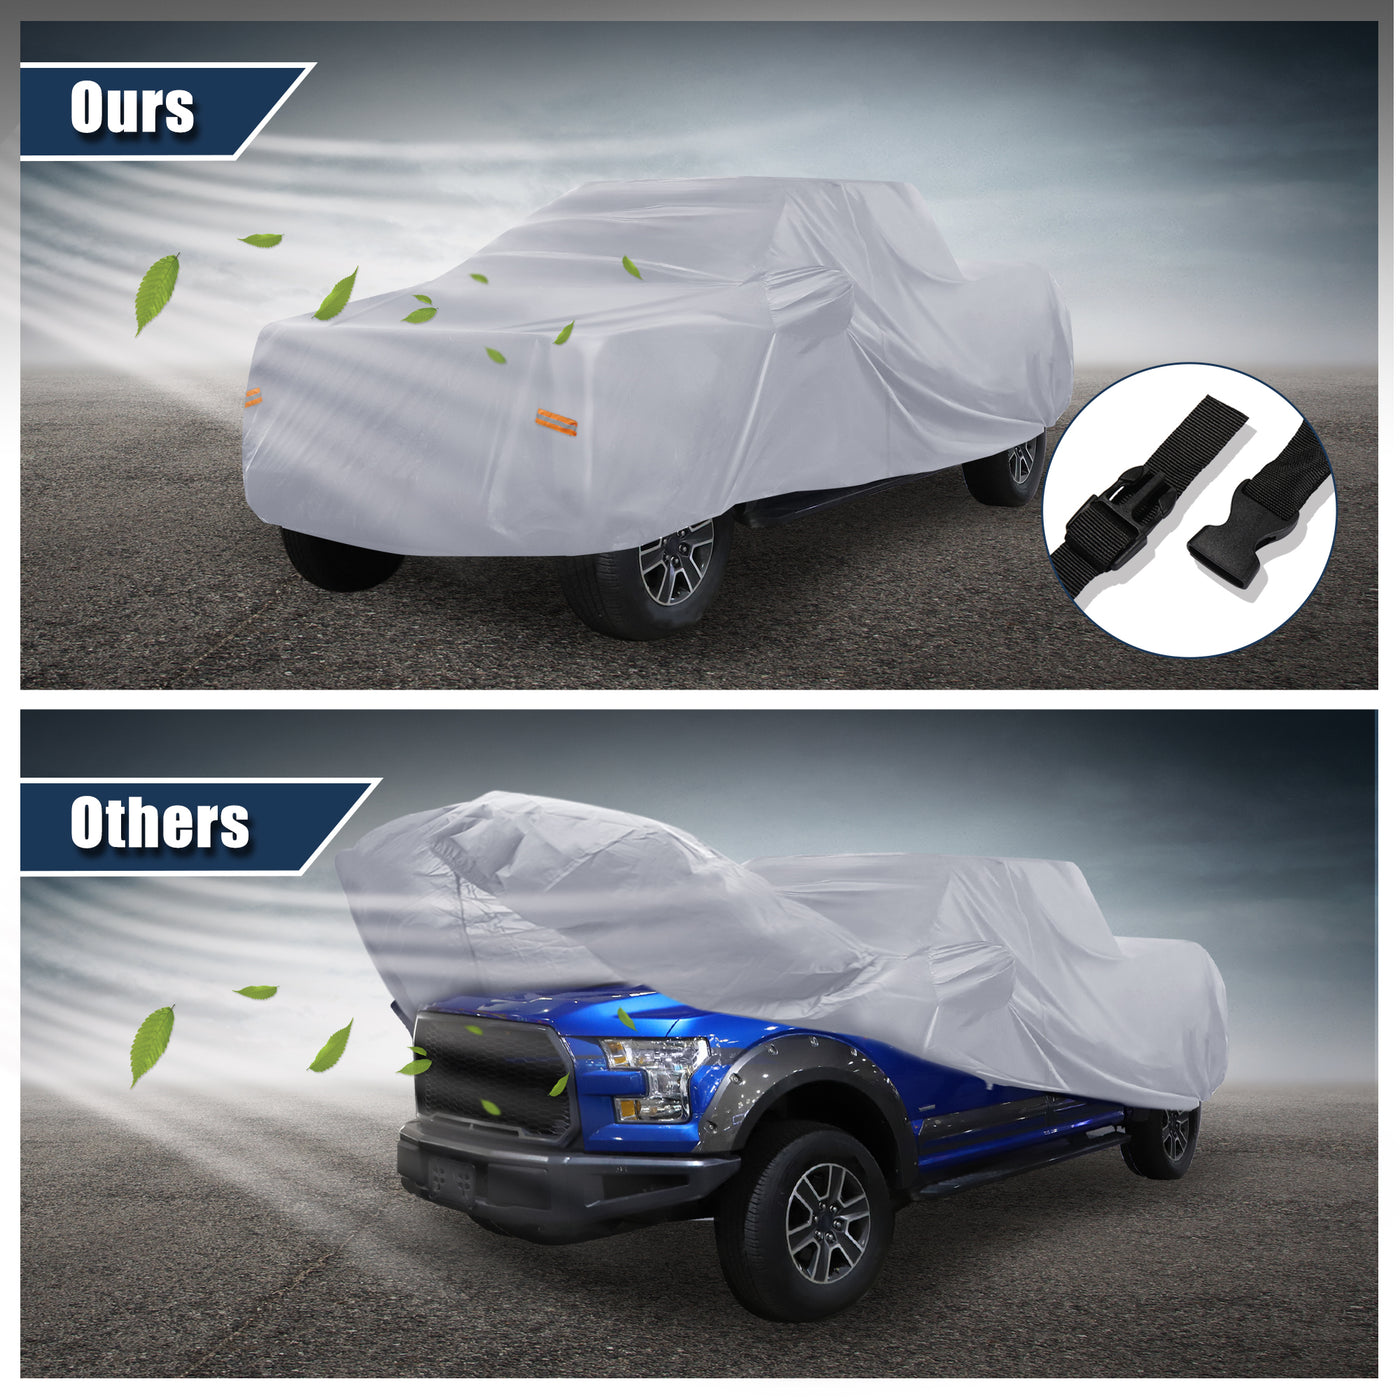 X AUTOHAUX Pickup Truck Car Cover for Toyota Tacoma Crew Cab Pickup 4 Door 6.1 Feet Bed 05-21 Outdoor Waterproof Sun Rain Dust Wind Snow Protection 190T PU with Driver Door Zipper